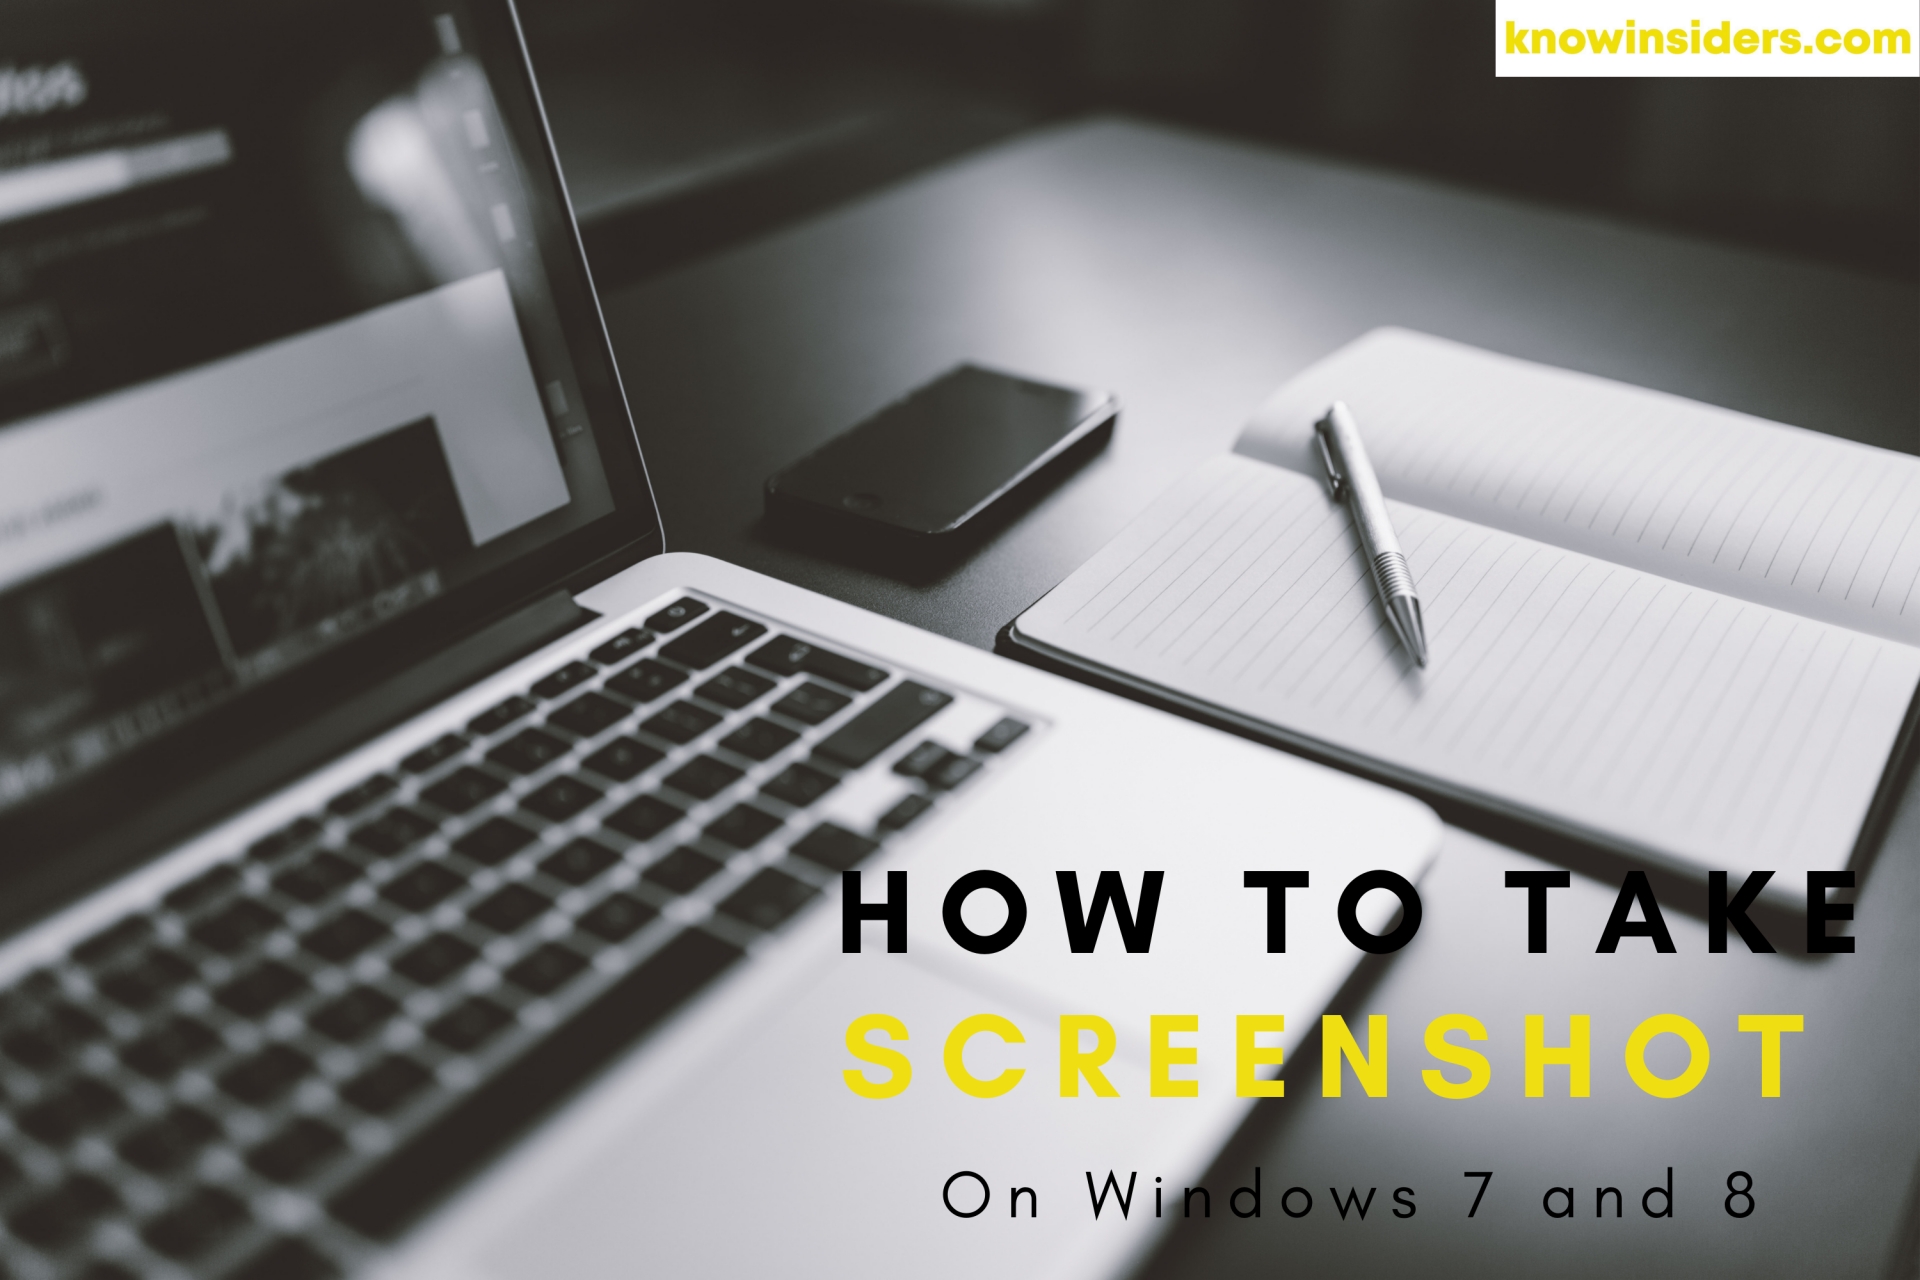 The Sumplest Ways To Take Screenshot on Windowns 7, 8